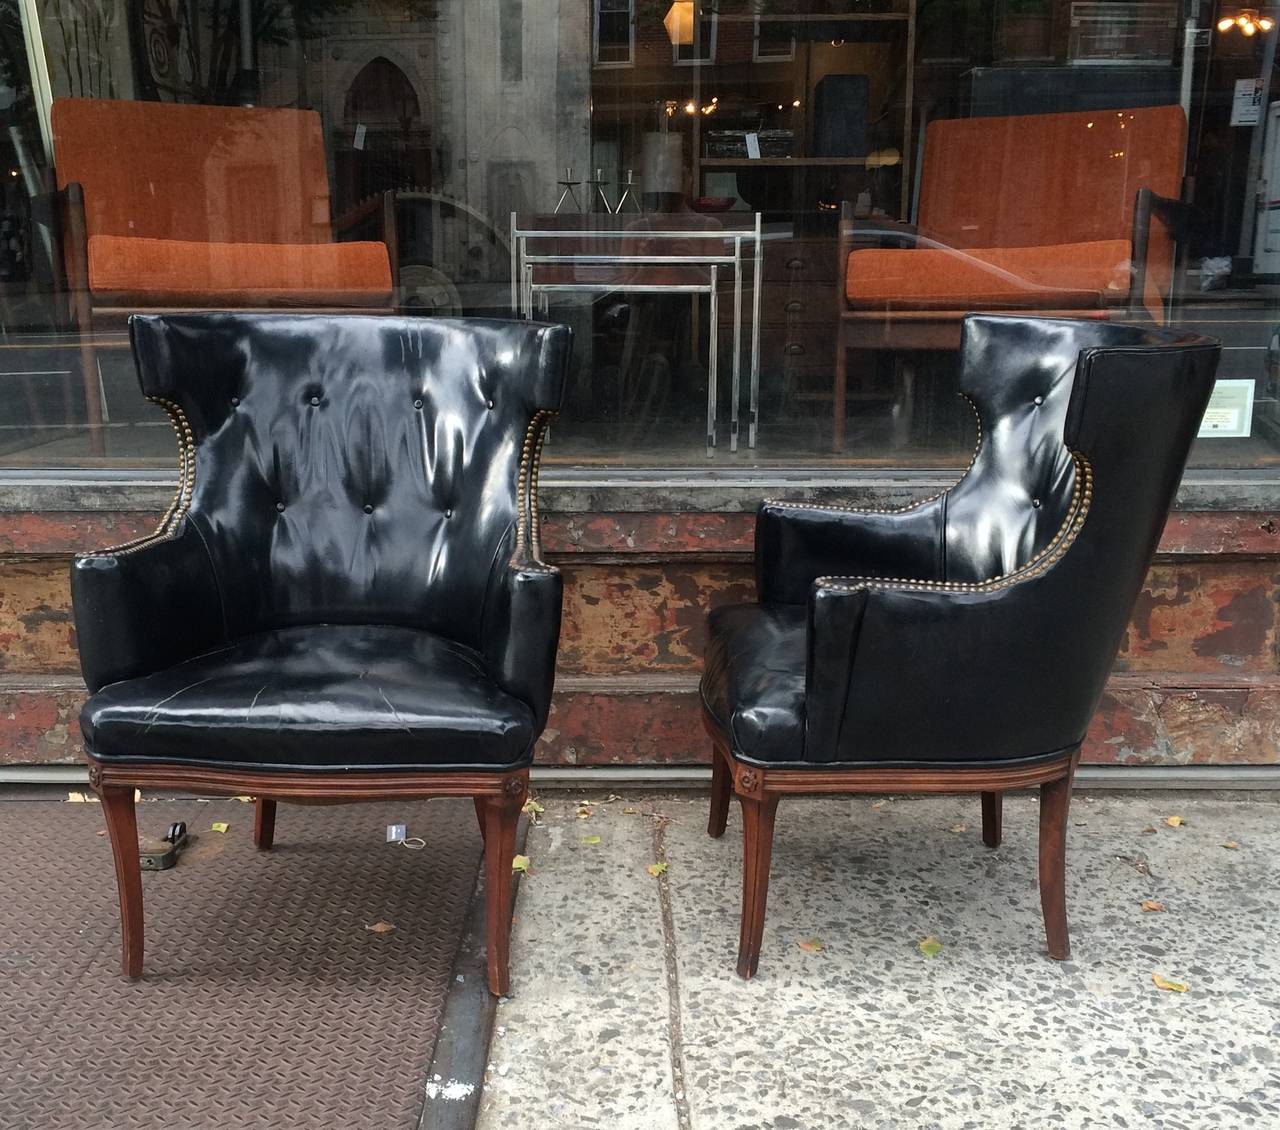 Pair of stately, black leather, high wingback, mahogany armchairs with buttoned backs and nailhead detail on the arms. There is some delicate carving on the legs. Overall patina on the chairs is fantastic.